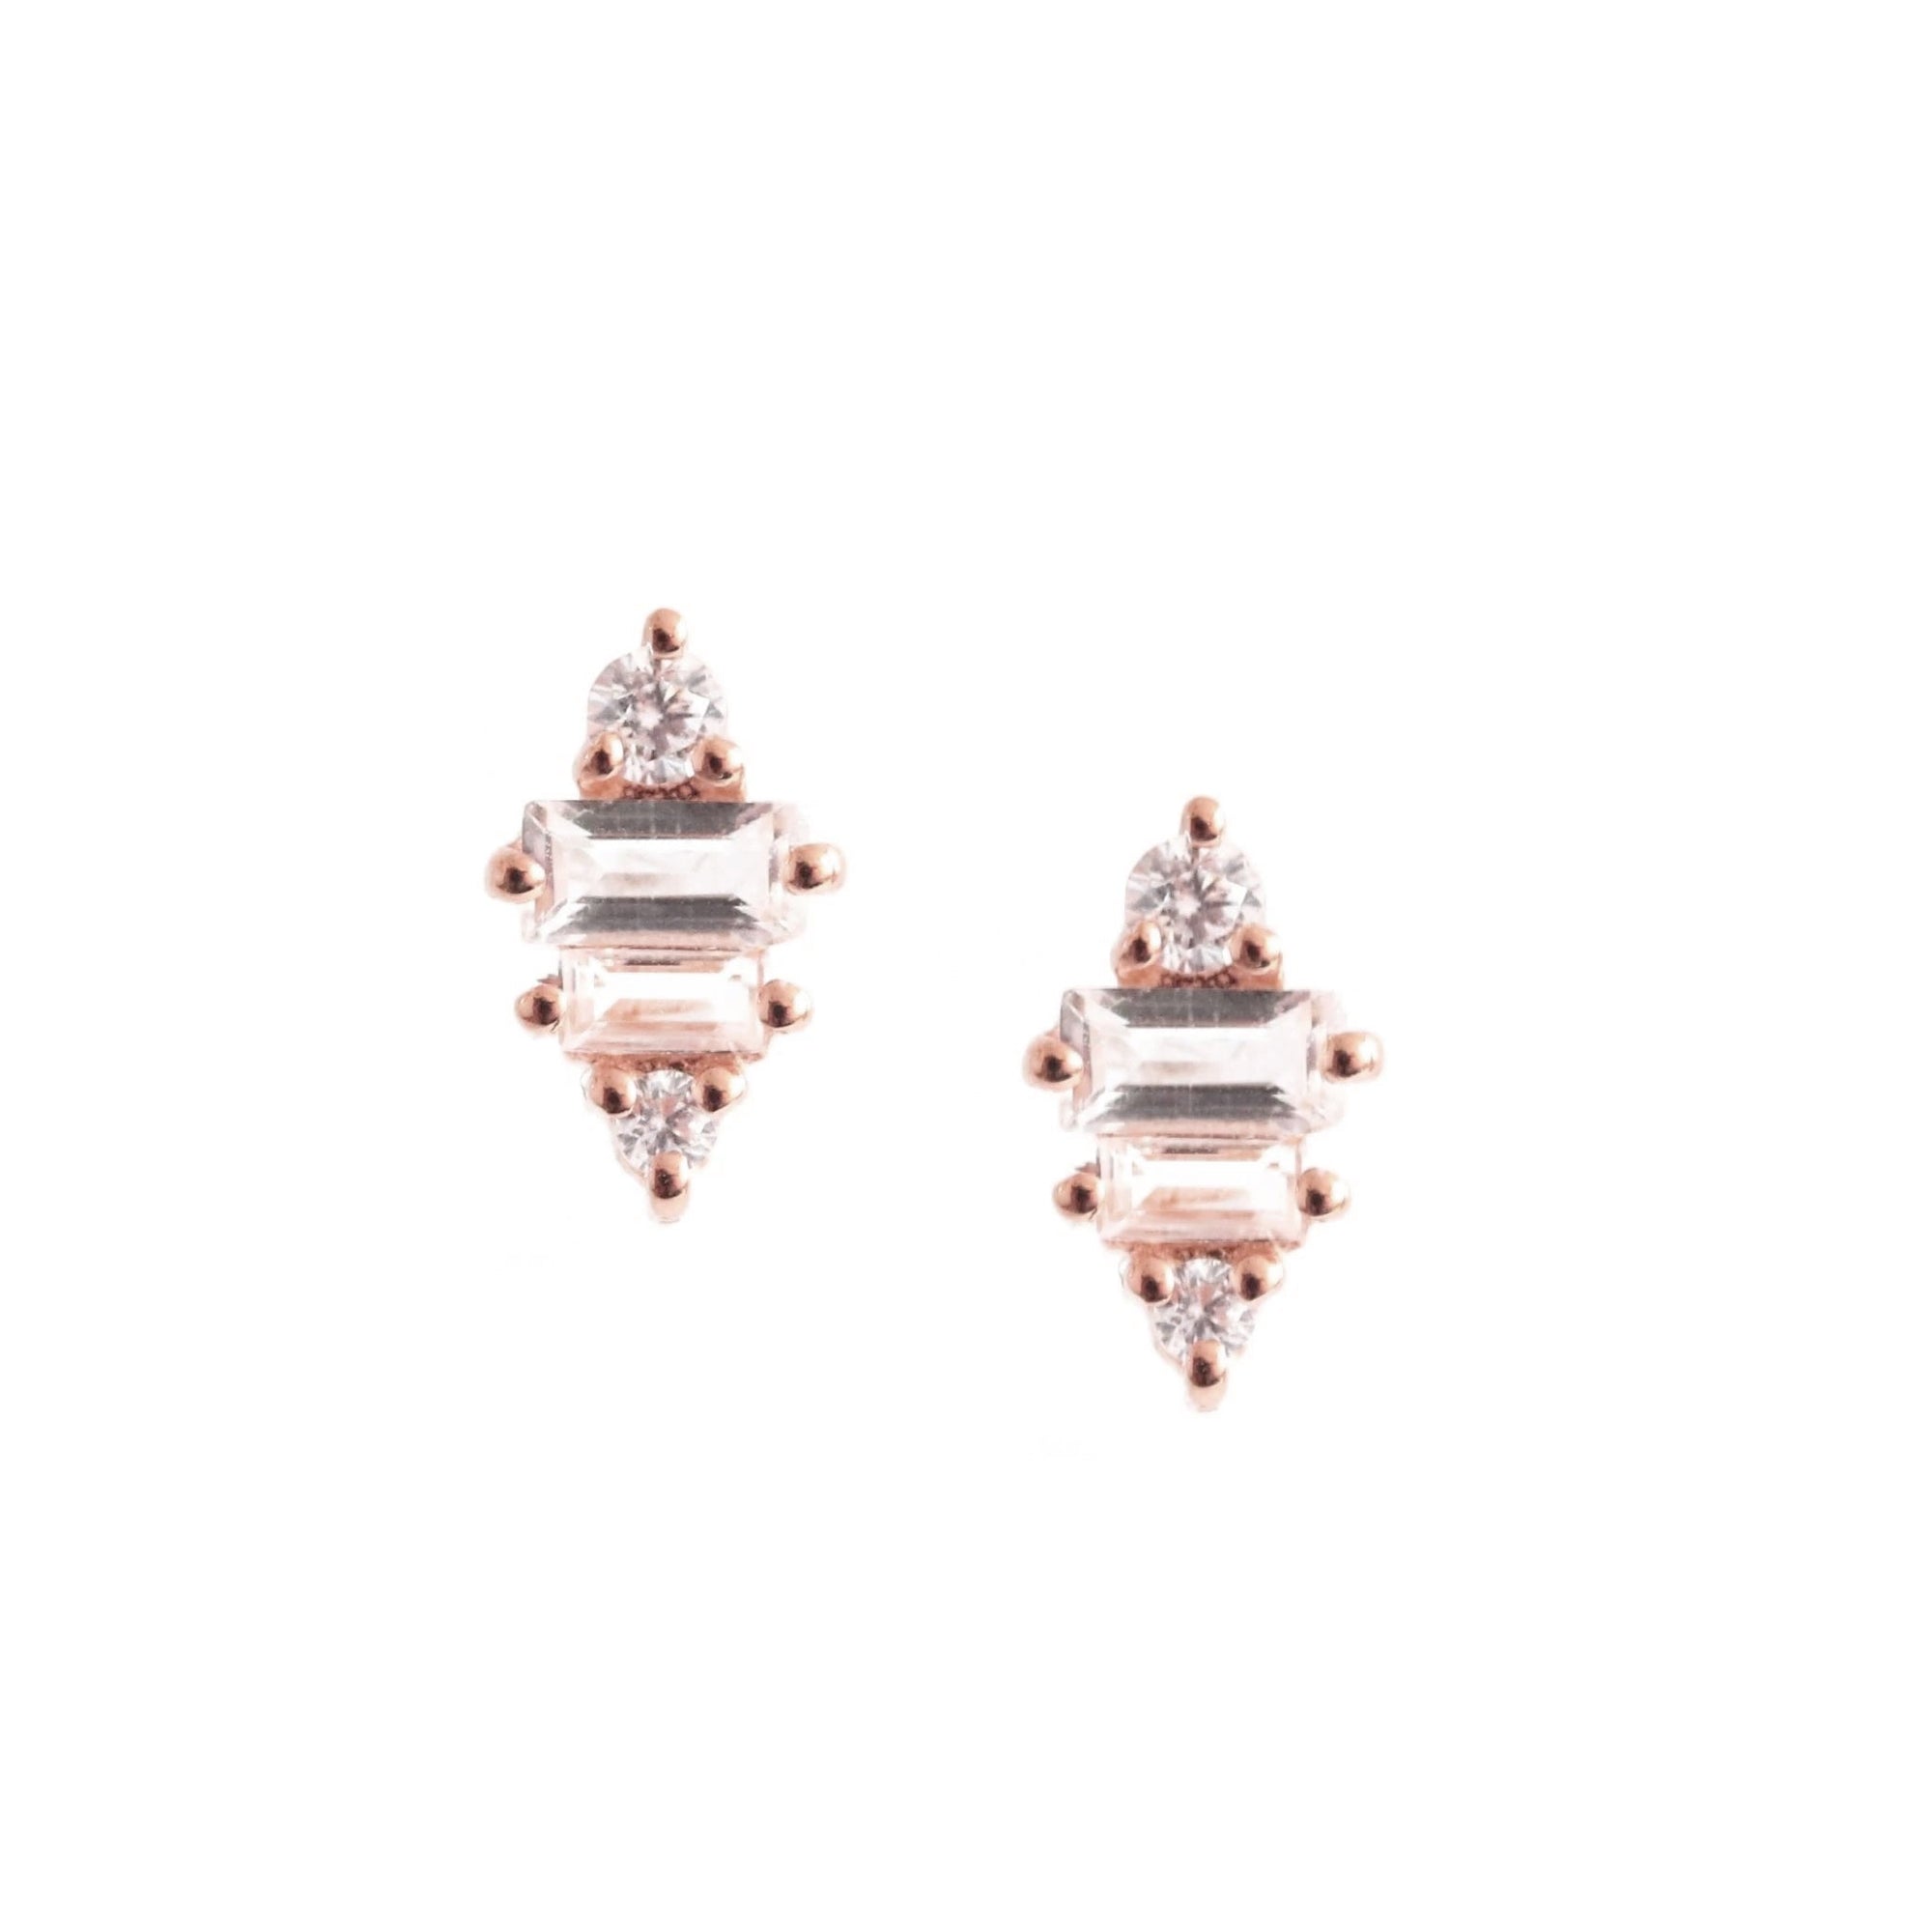 TINY LOYAL PRISM STUDS - WHITE TOPAZ, CUBIC ZIRCONIA, & ROSE GOLD - SO PRETTY CARA COTTER